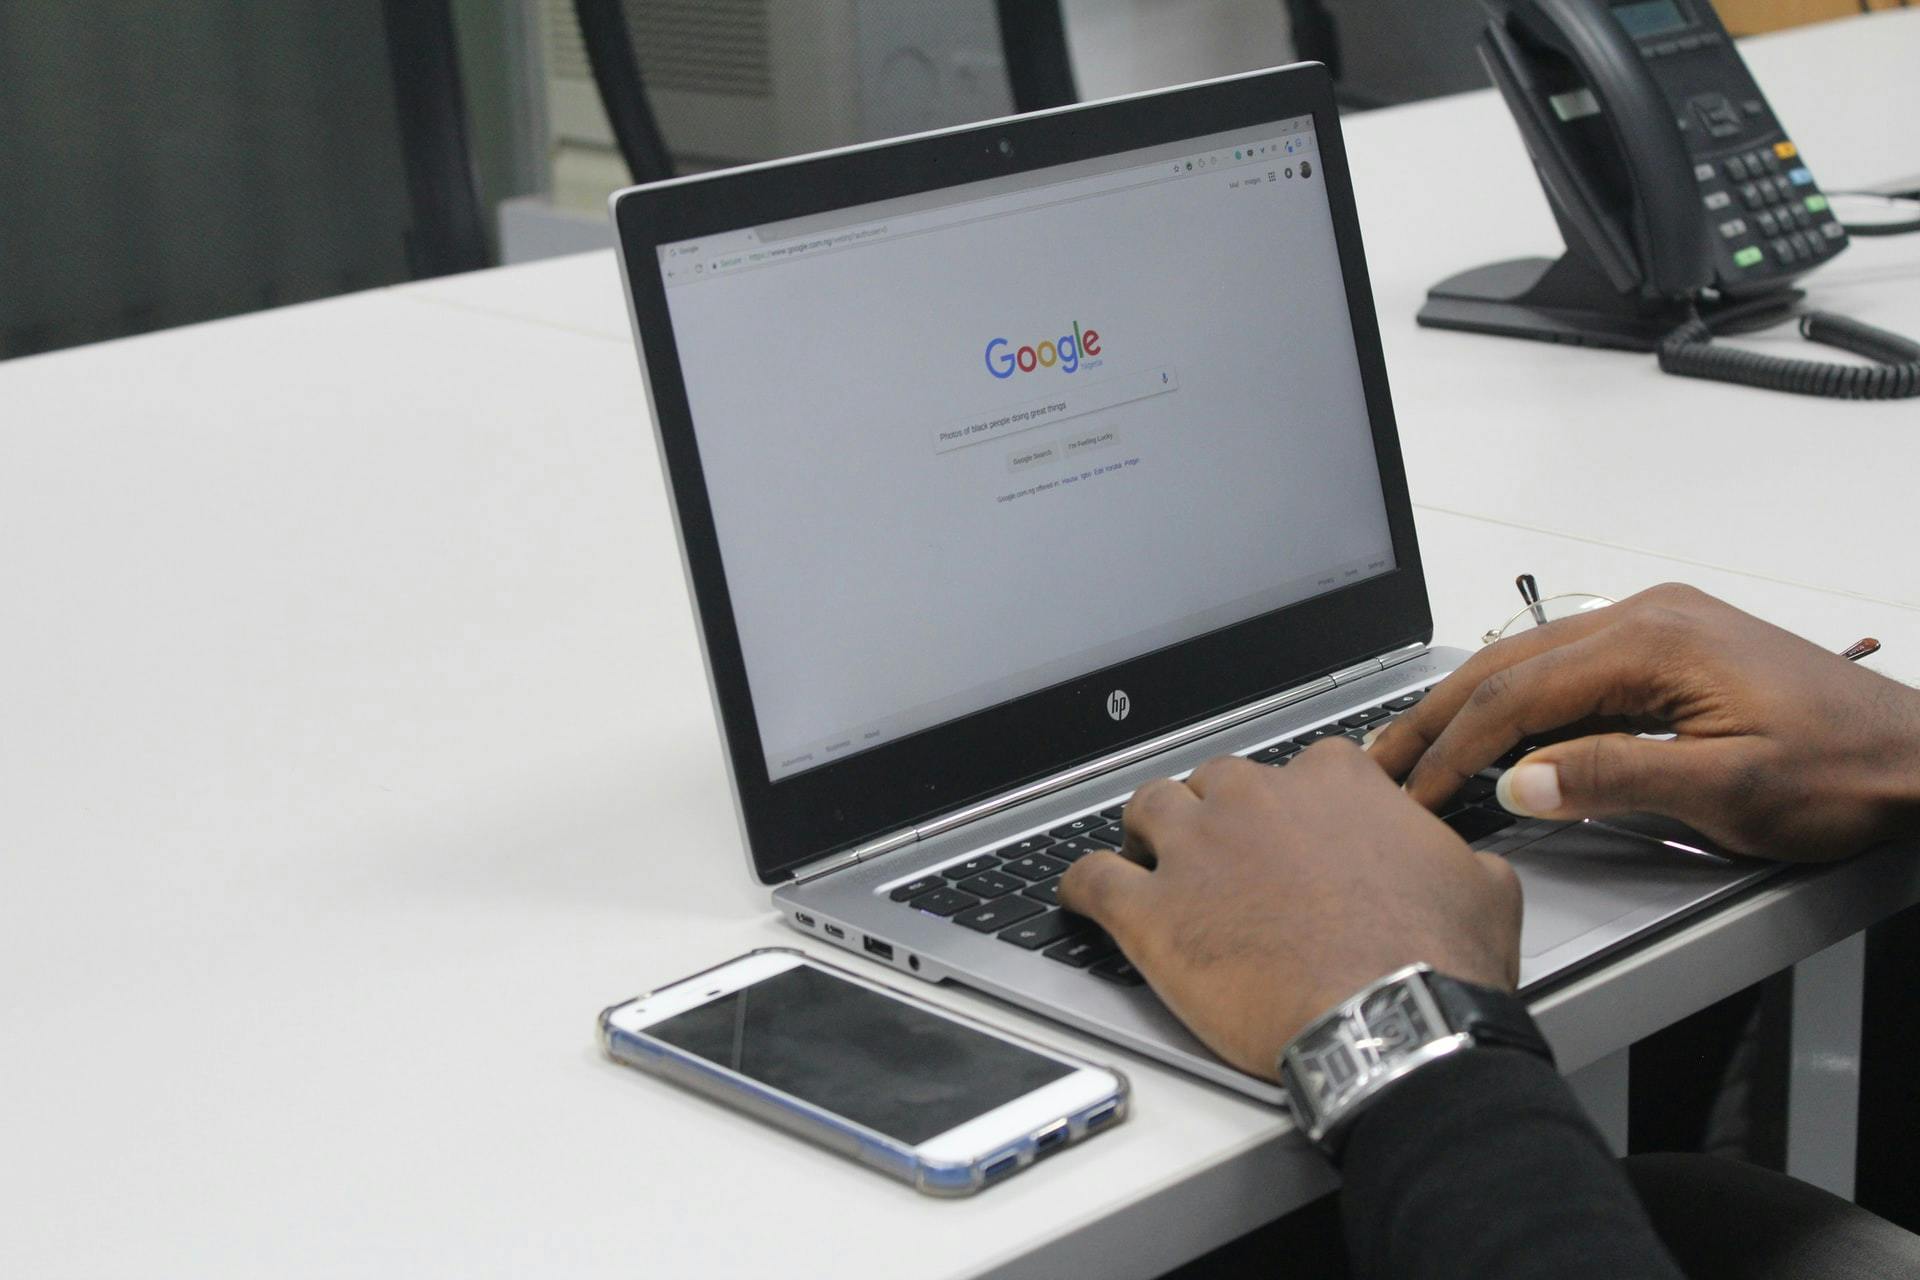 A person making a Google search on a laptop computer at a desk.